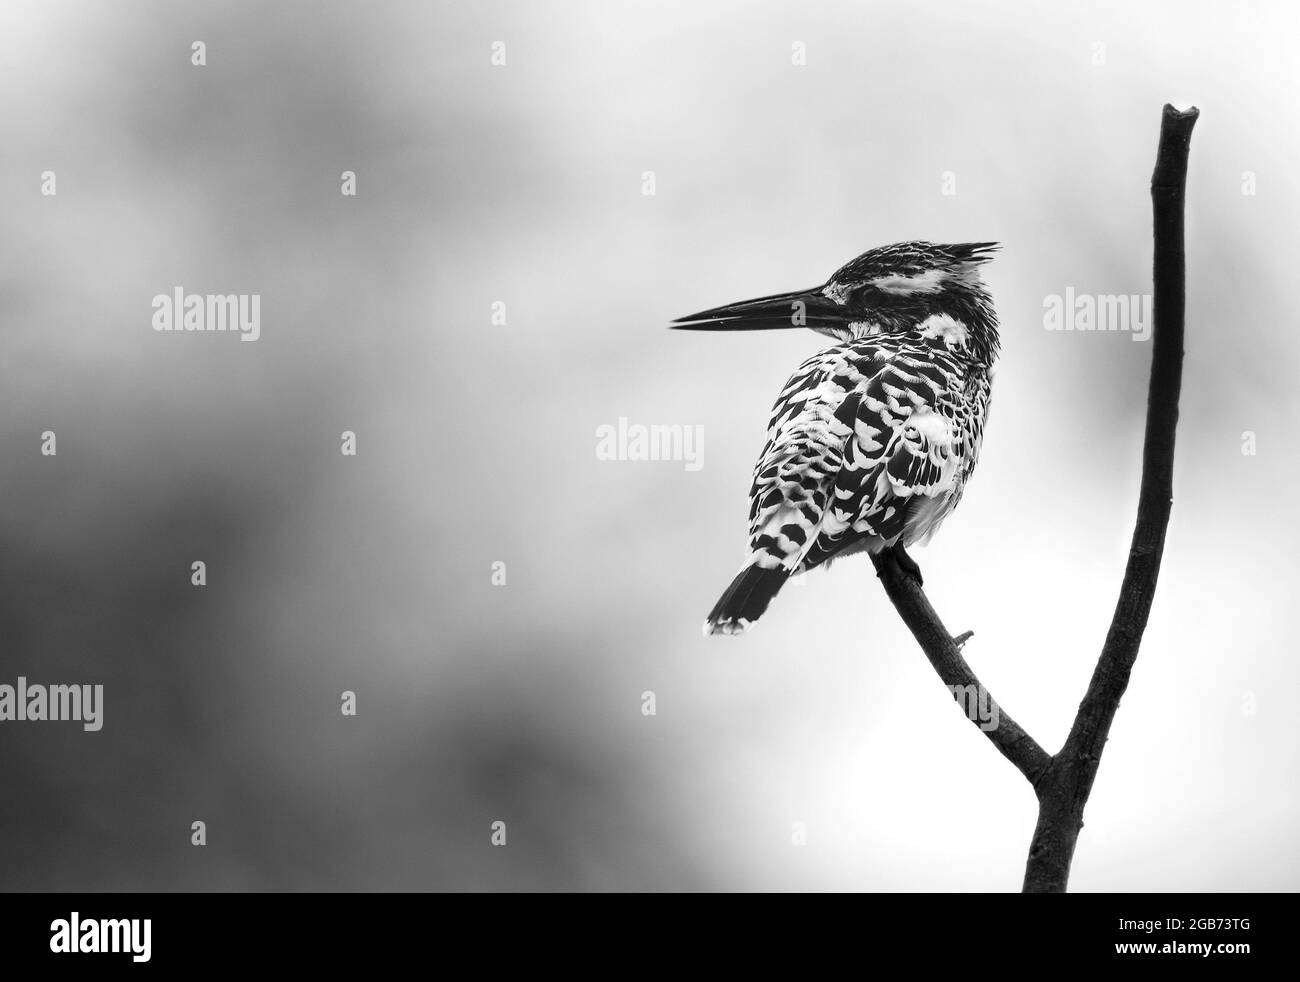 Kingfisher Black and White Stock Photos & Images - Alamy